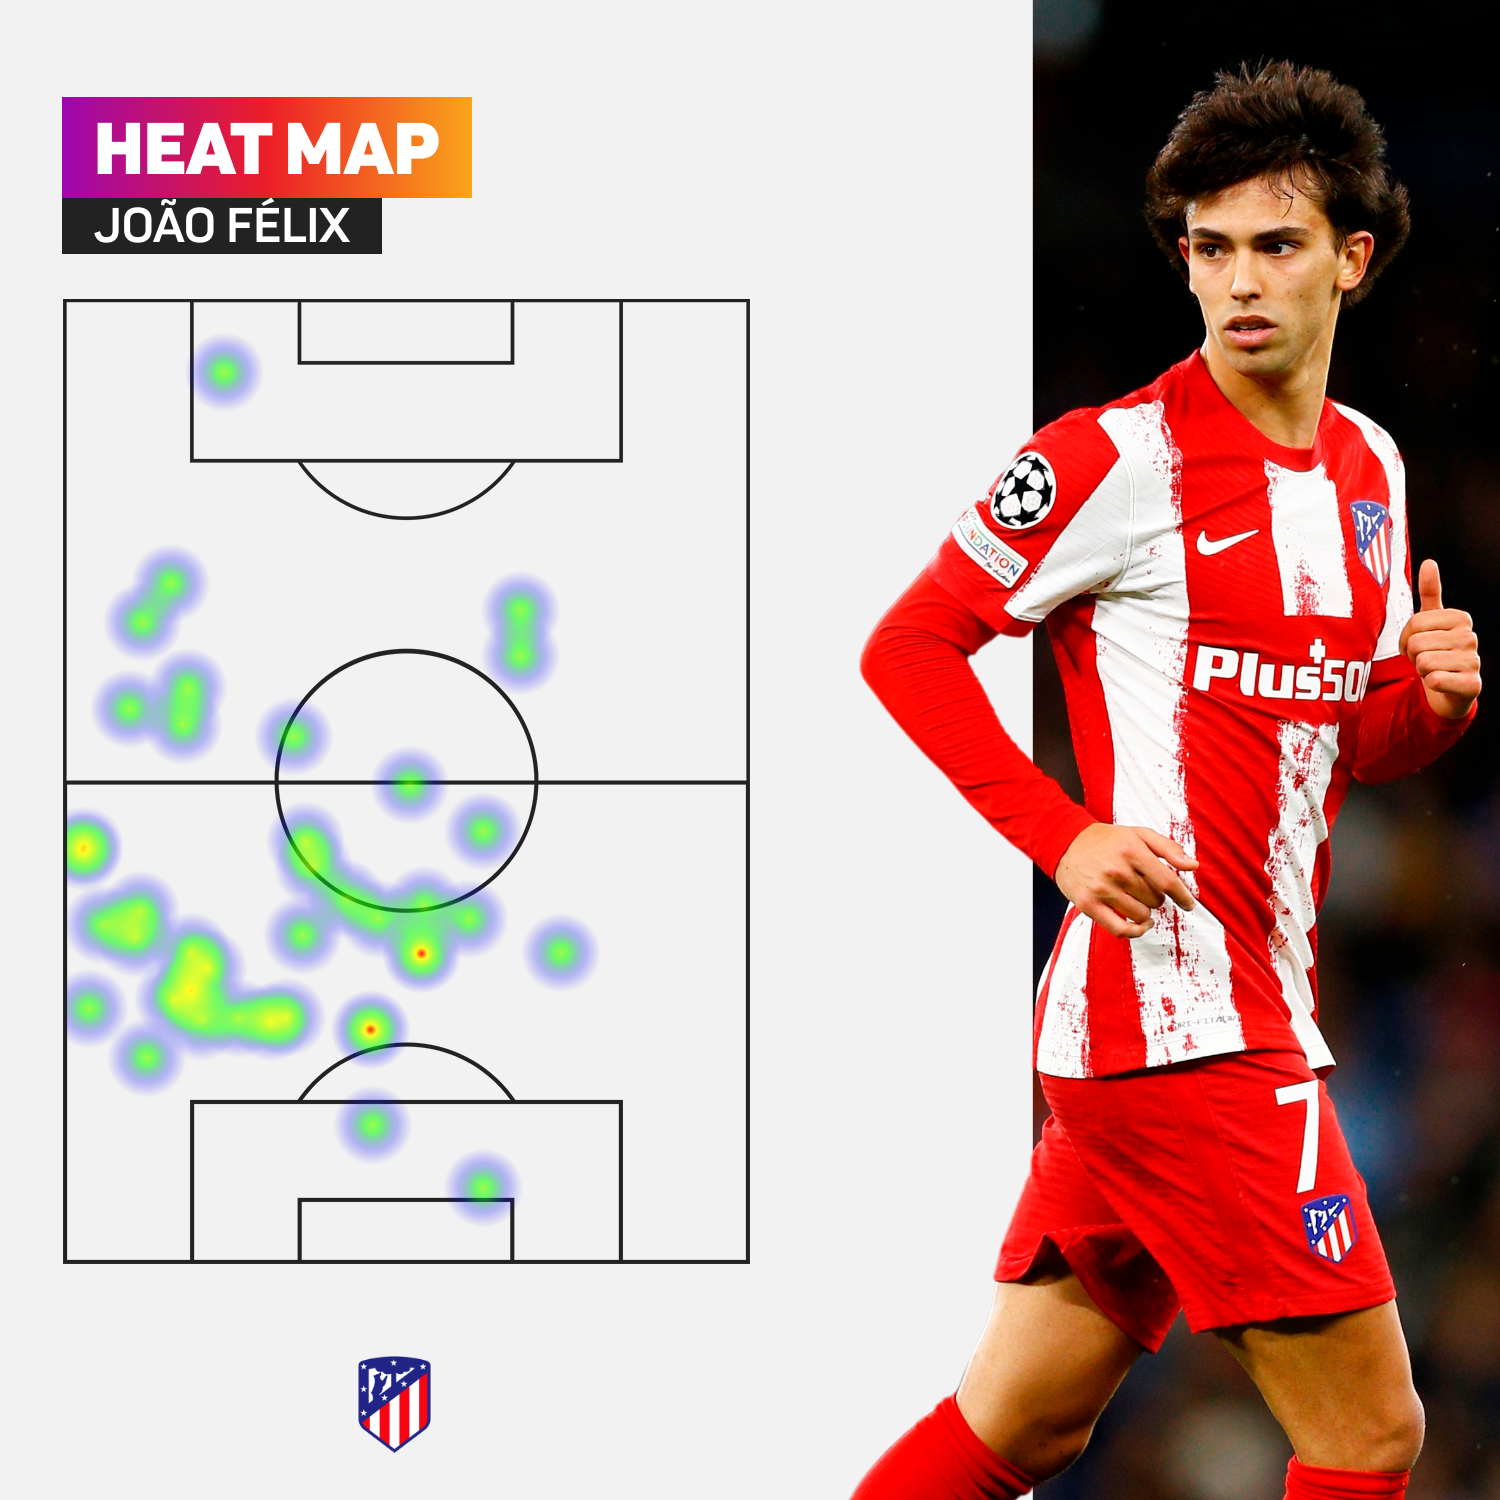 Joao Felix had a defensive role against Manchester City